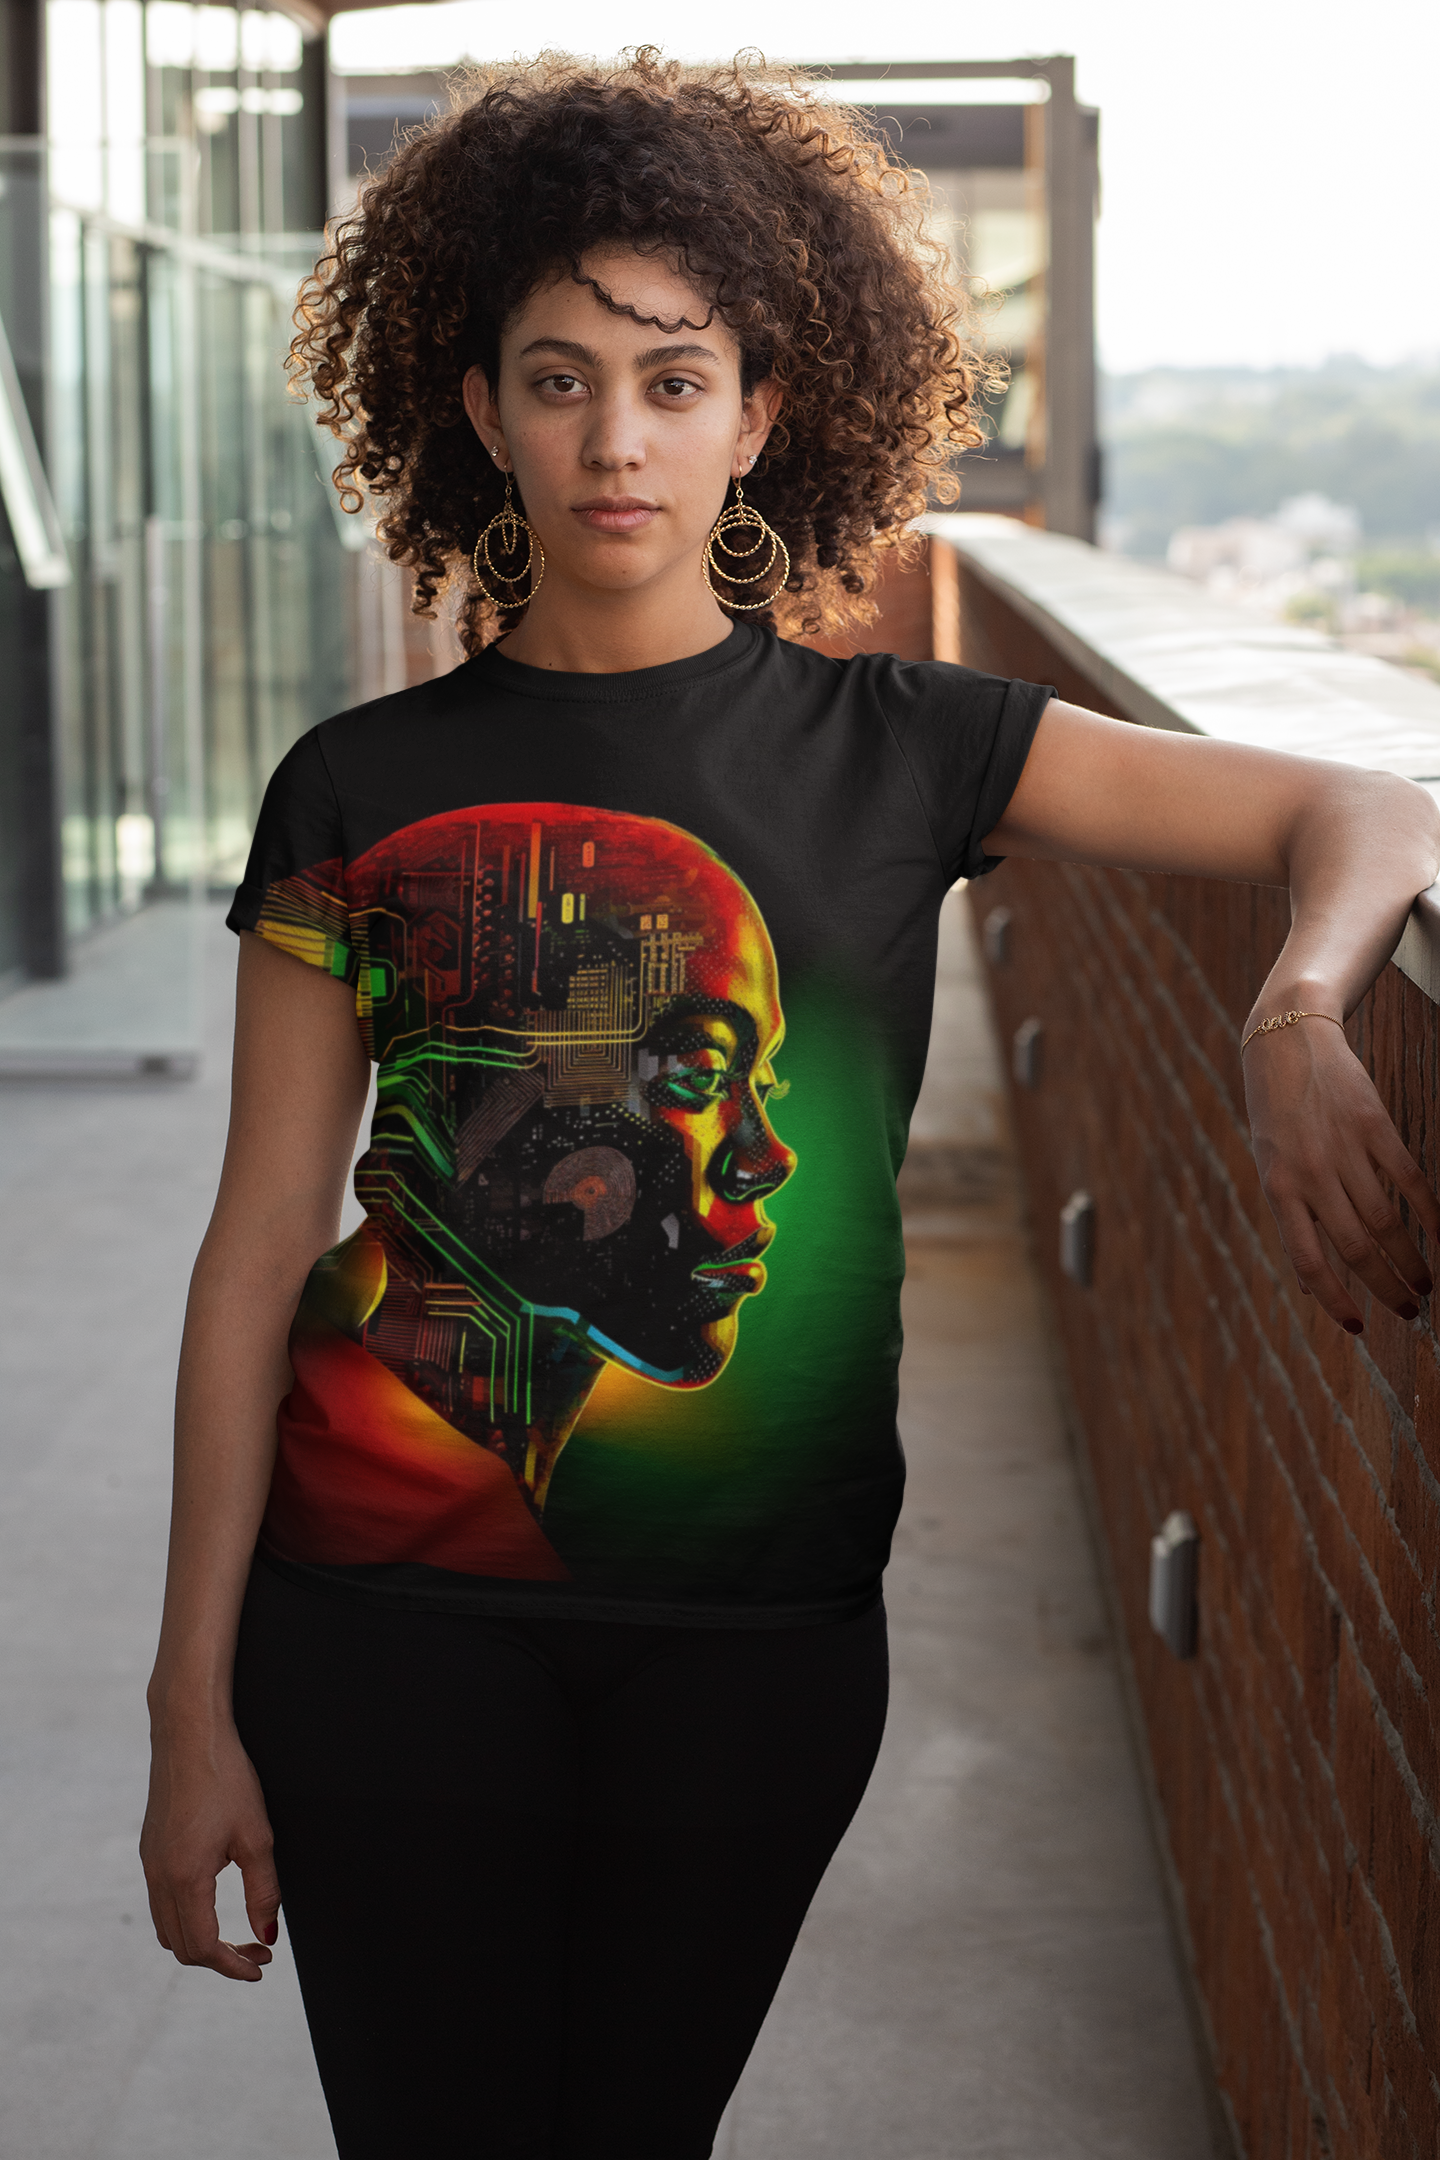 "AFRO FUTURE" - African American Themed Unisex Tee